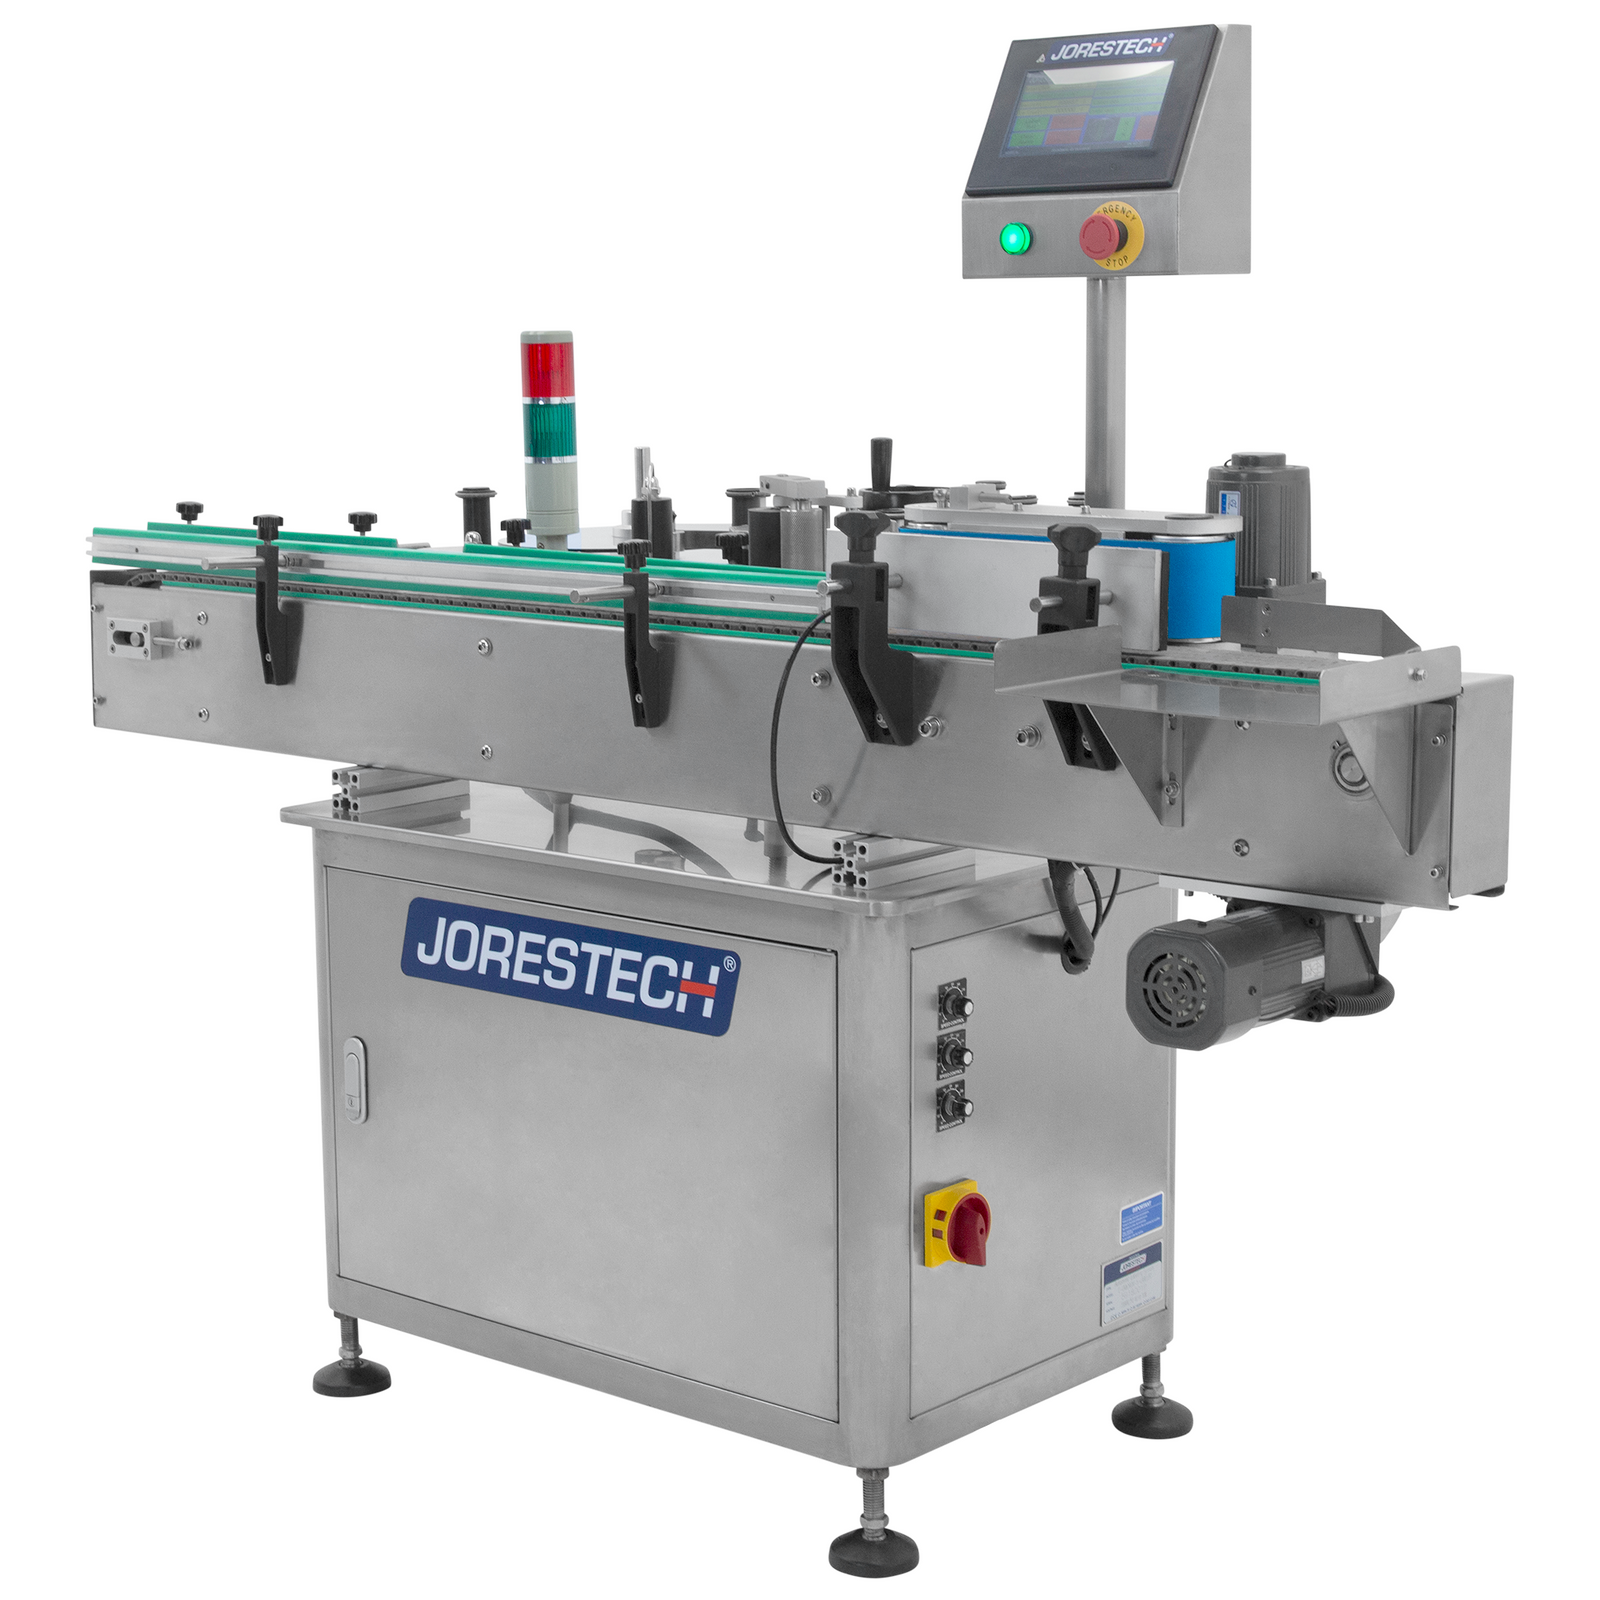 Diagonal view of the JORESTECH stainless steel automatic label applicator for round containers with blue Jorestech logo with green guard rails 